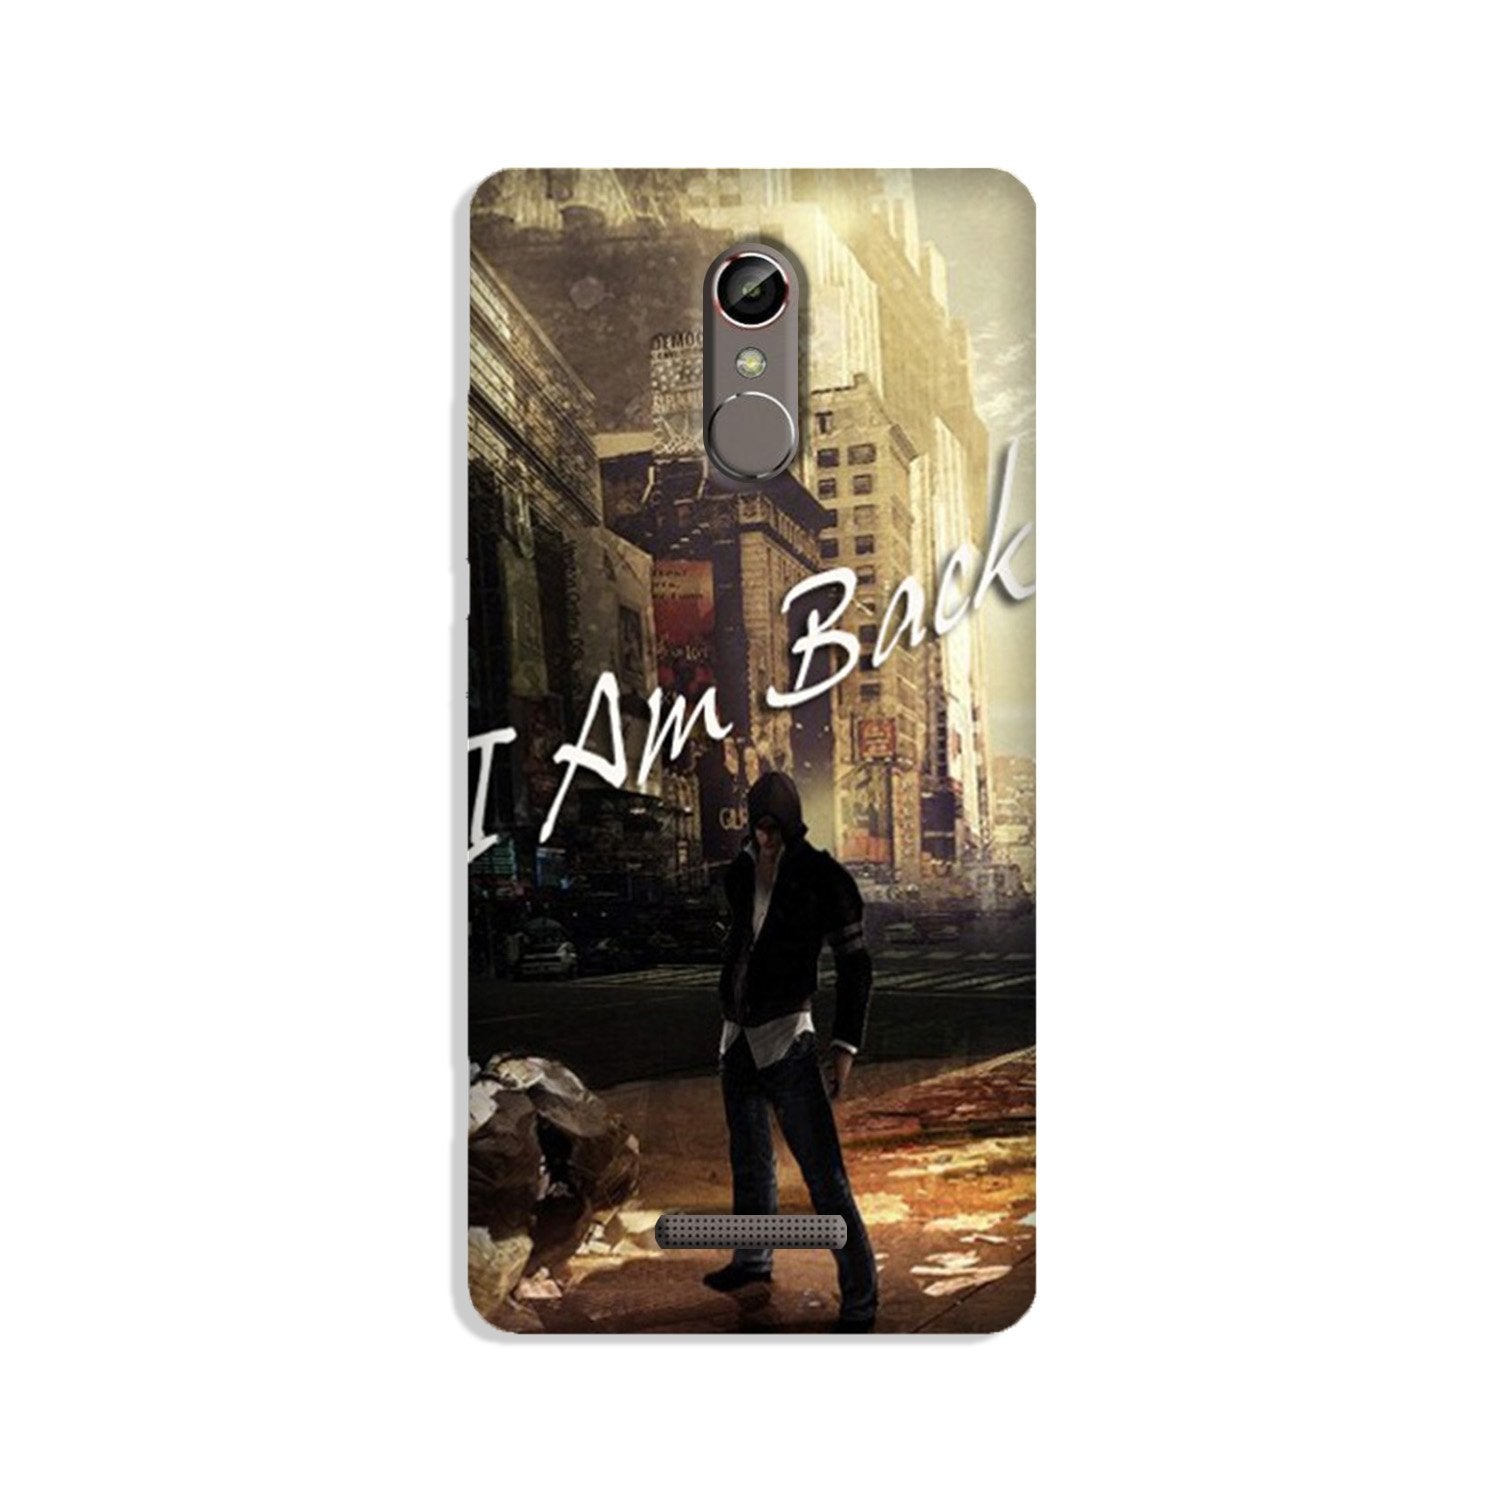 I am Back Case for Gionee S6s (Design No. 296)